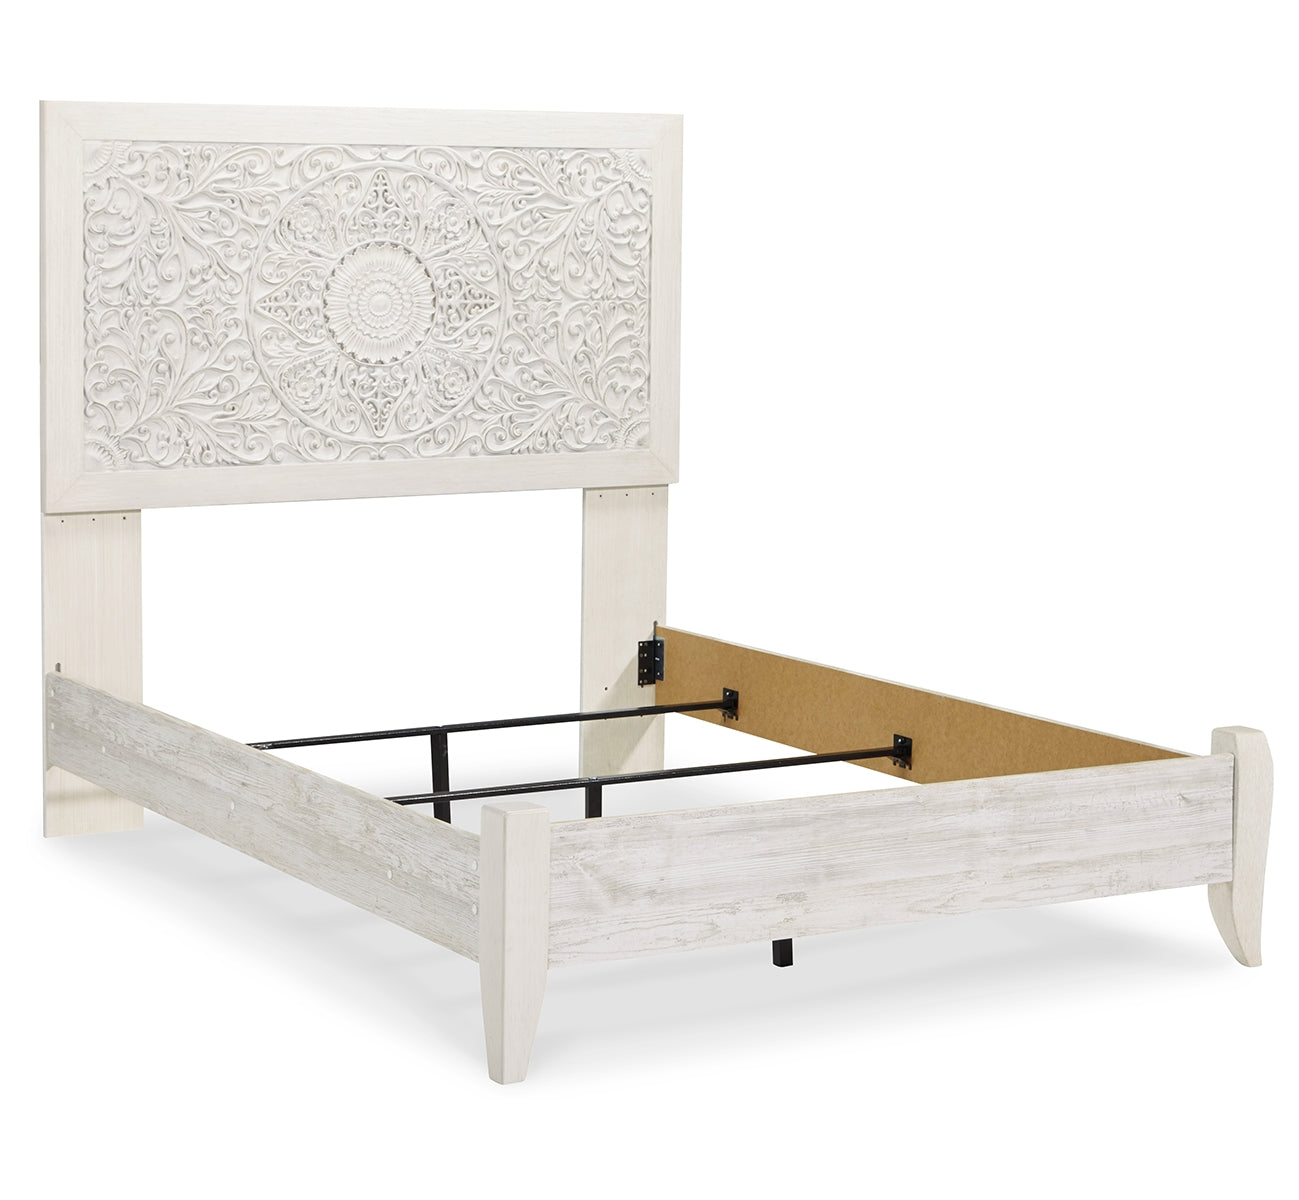 Paxberry Full Panel Bed with Nightstand